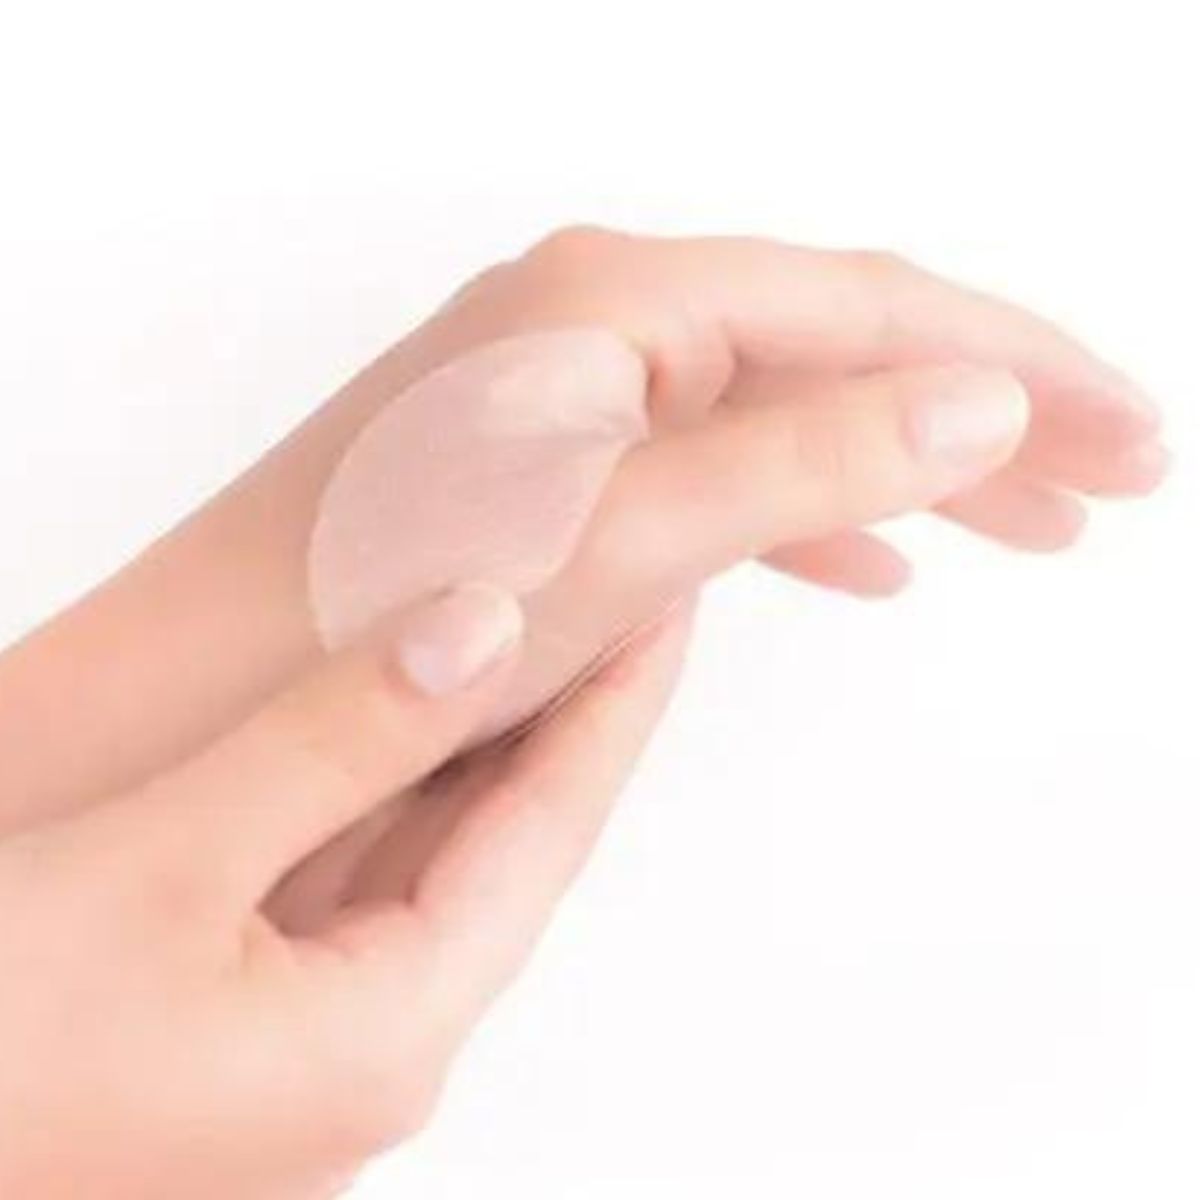 Silicone scar Treatment for scars between the thumb and index finger